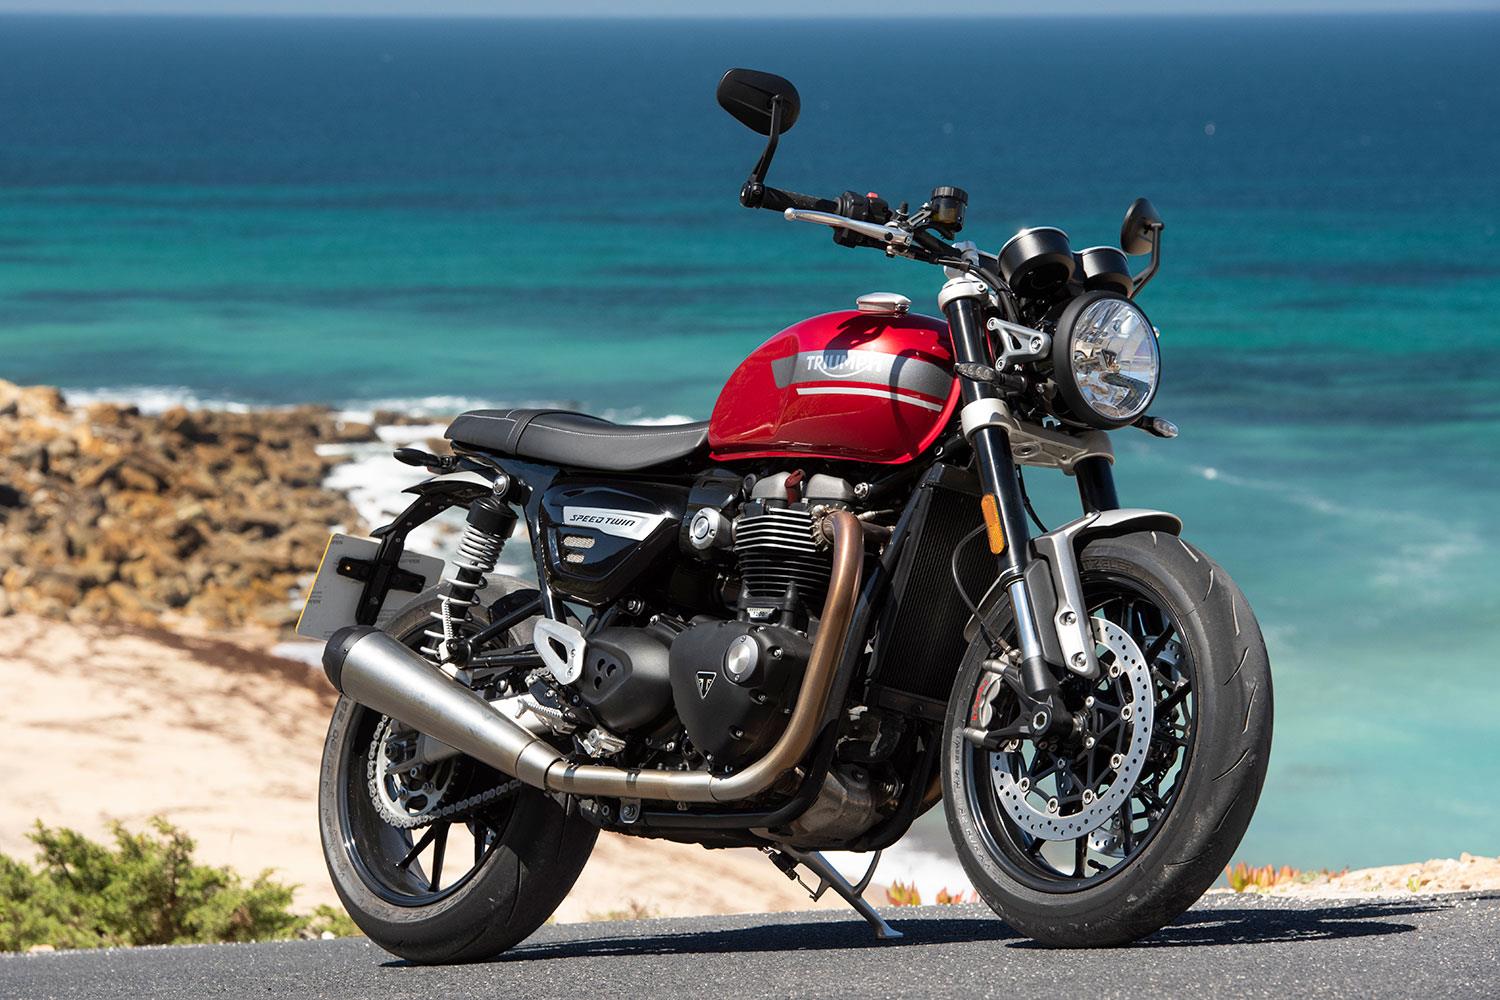 Triumph's updated Speed Twin is the bike we always wanted